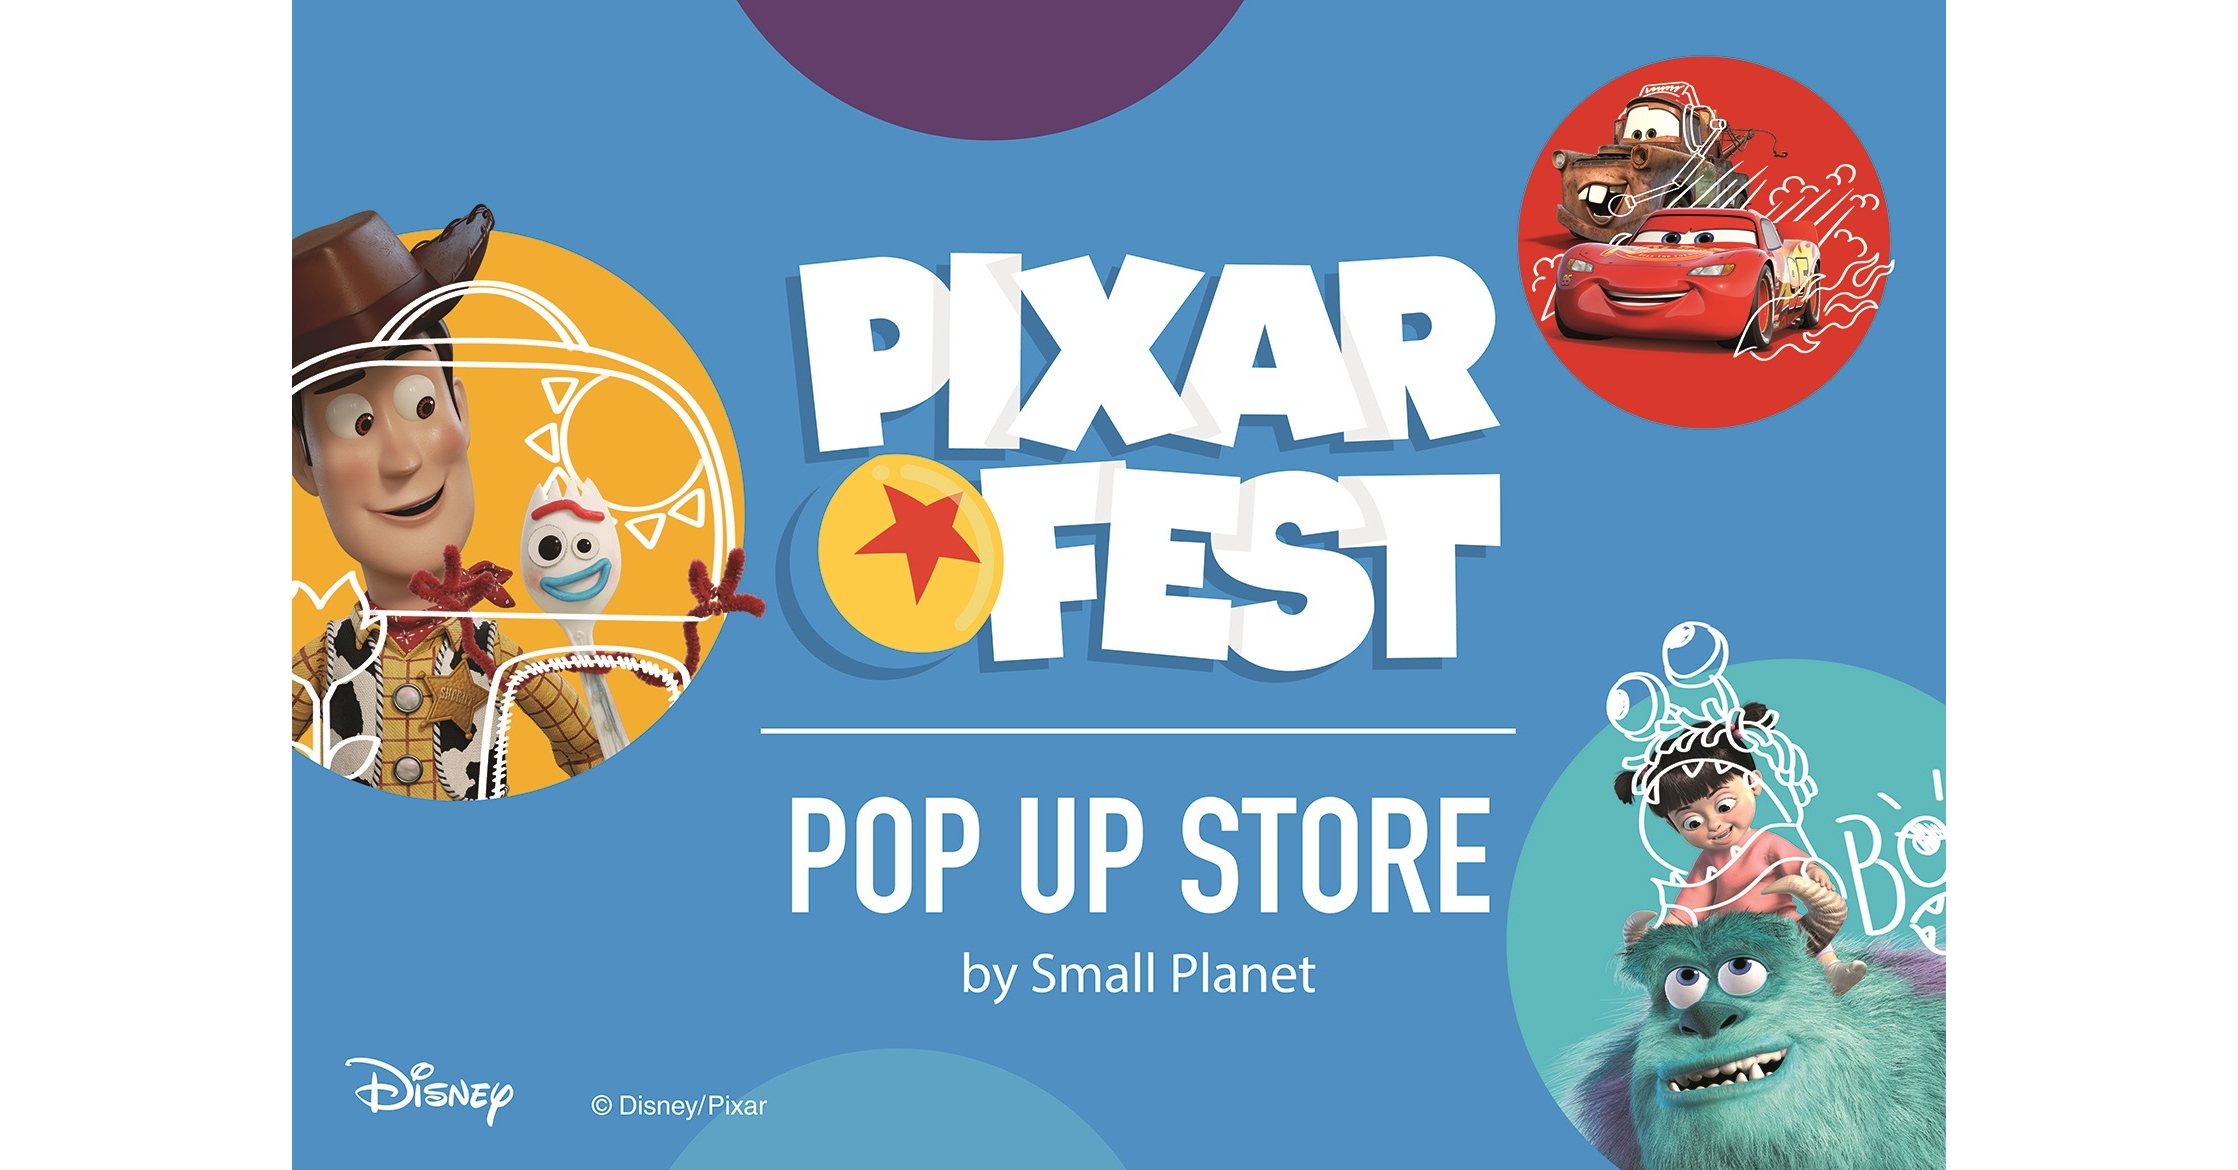 pixar-fest-pop-up-store-by-small-planet1-2